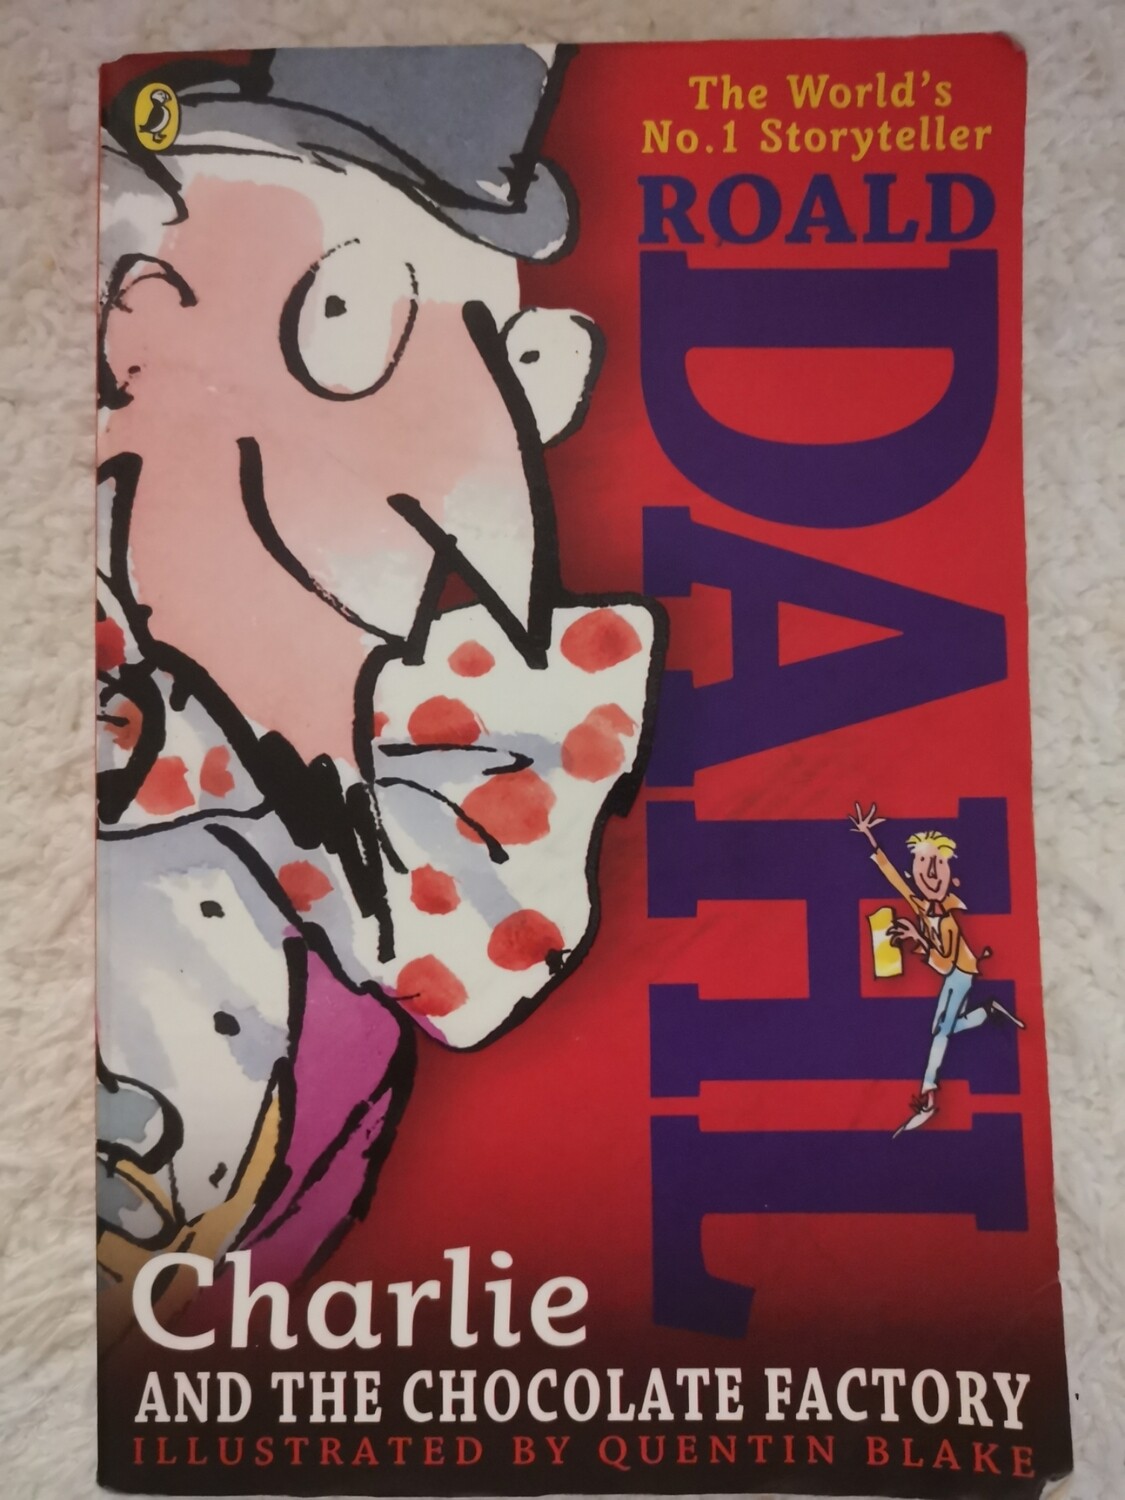 Charlie and the chocolate factory, Roald Dahl